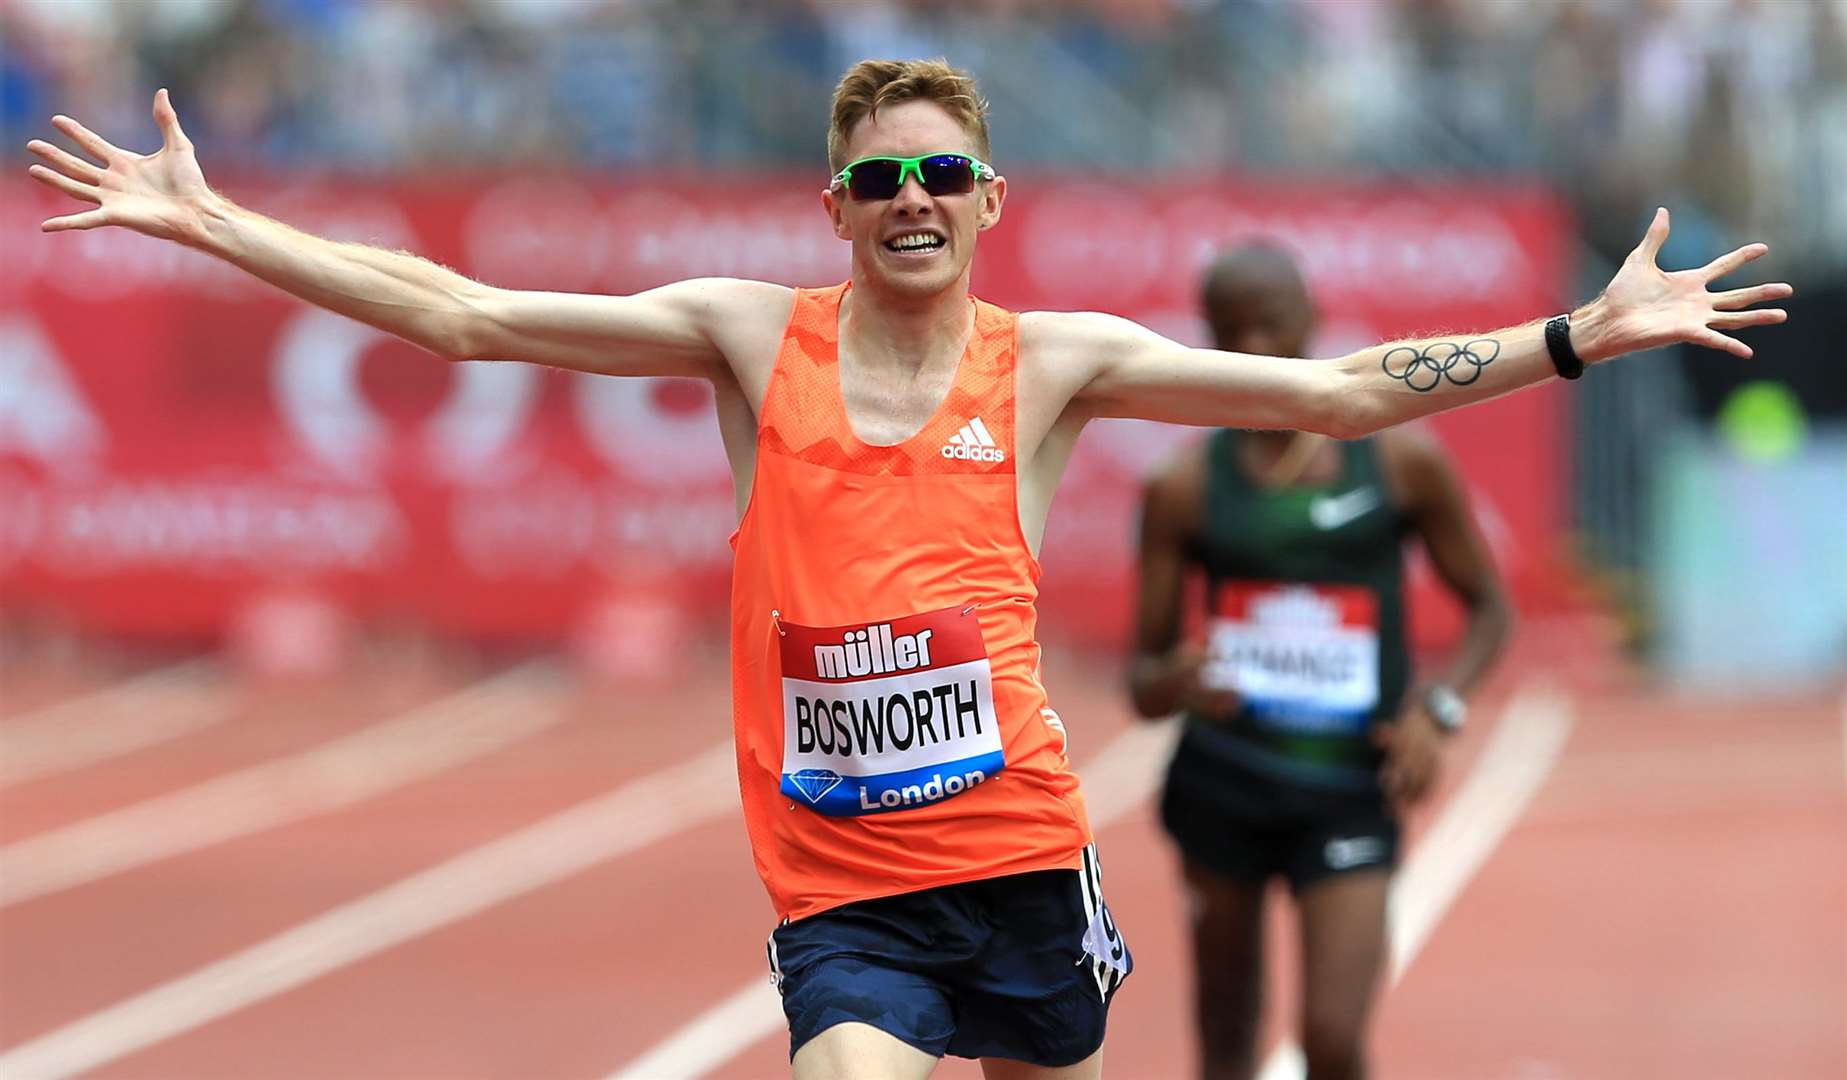 Tonbridge AC's Tom Bosworth celebrates victory – and a new world record – in the men's 3,000m walk at the Anniversary Games Picture: British Athletics